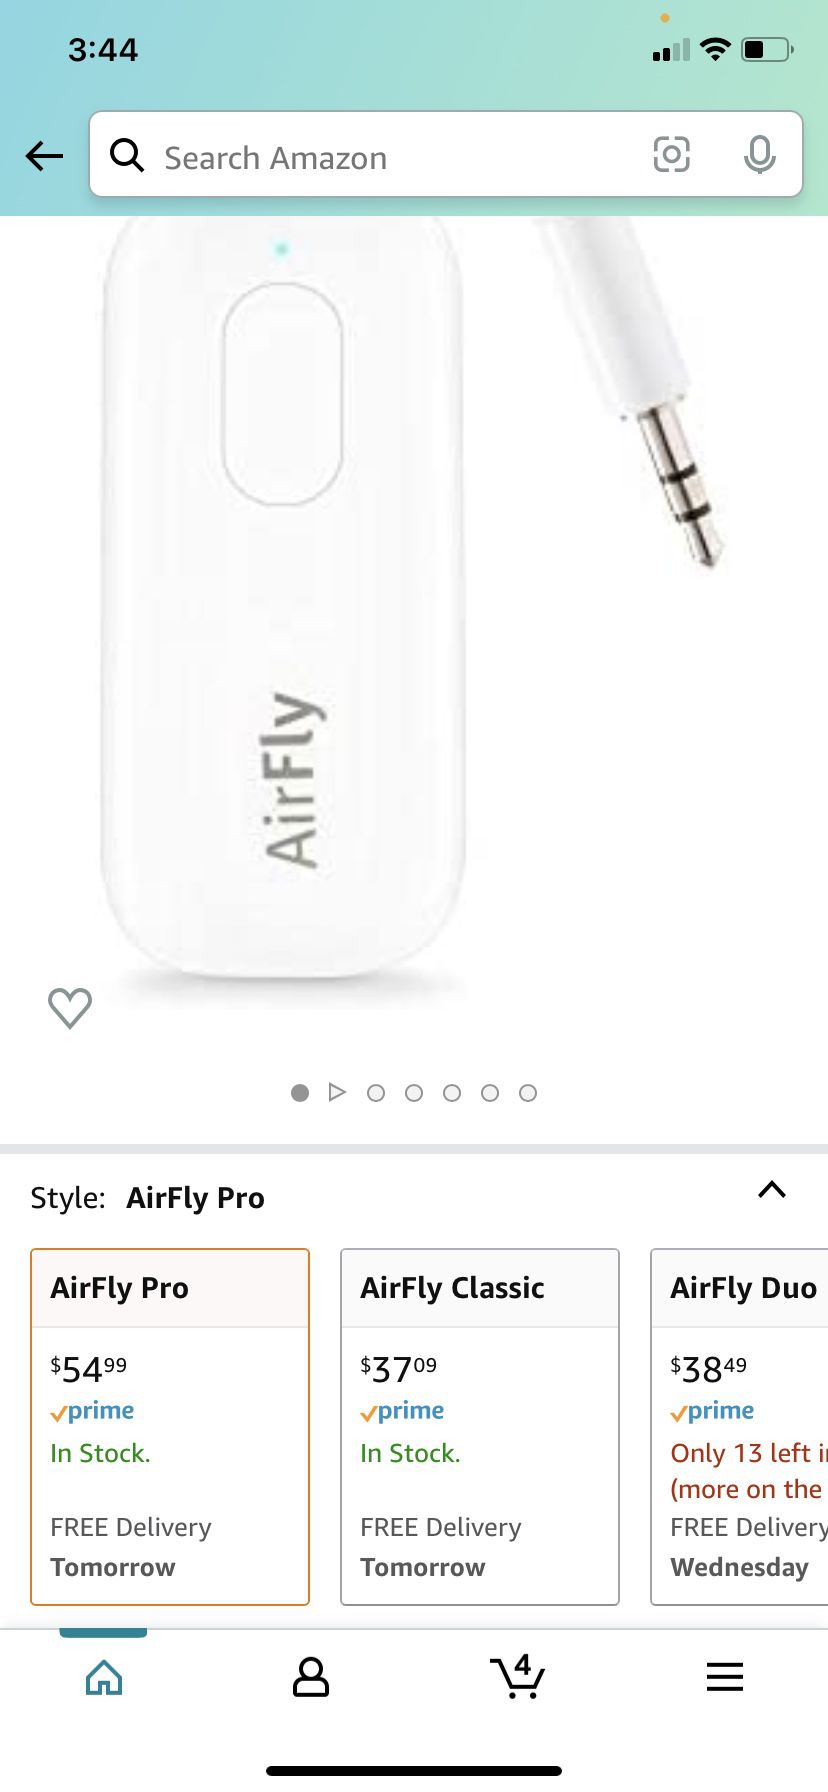 Twelve South AirFly Pro | Wireless Transmitter/Receiver with Audio Sharing for up to 2 AirPods/Wireless Headphones to Any Audio Jack for use on Airpla